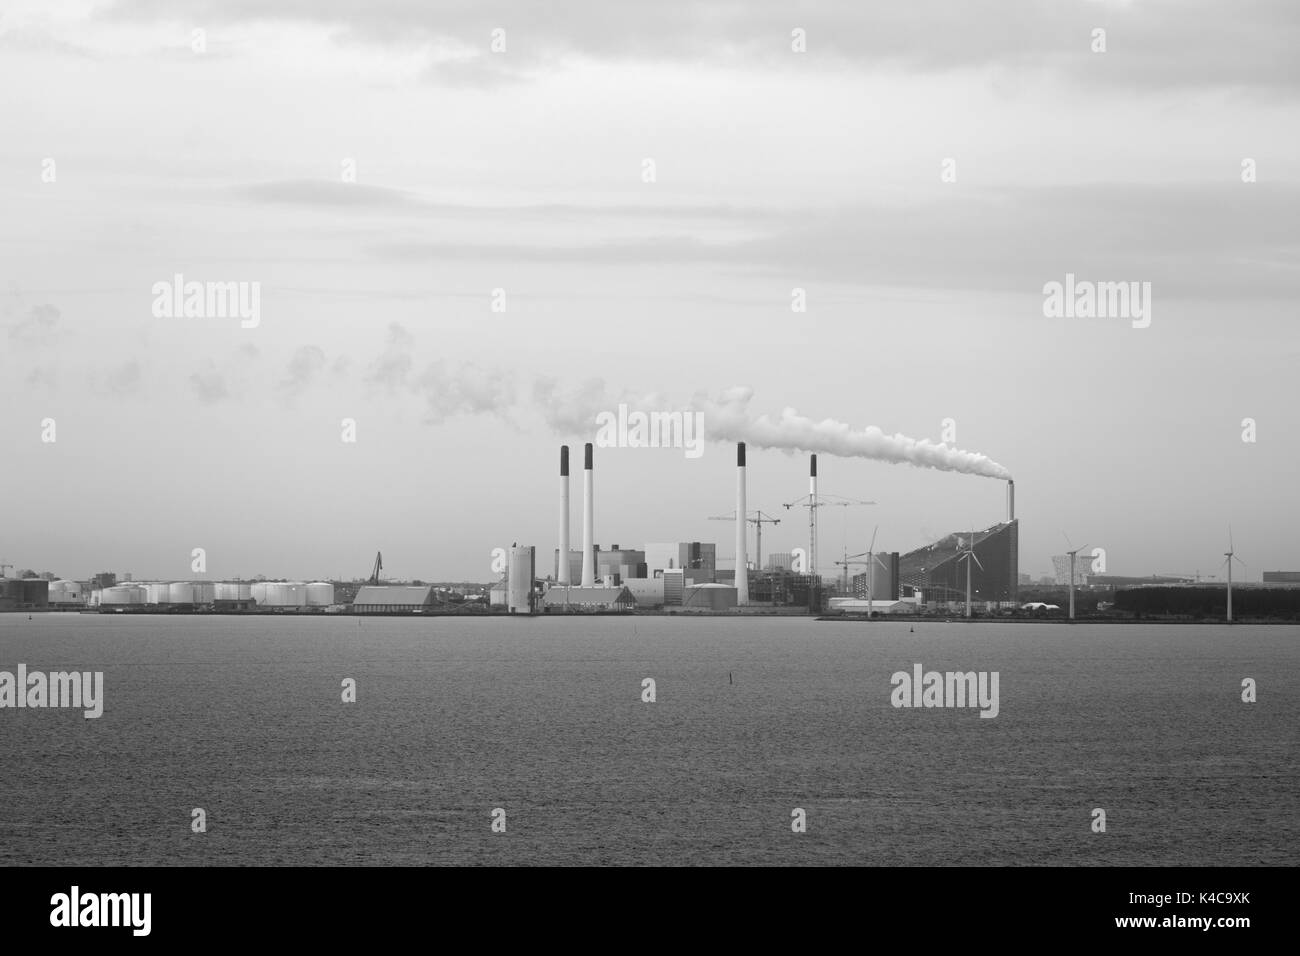 factory chimney emitting fumes into the atmosphere, close to the sea Stock Photo